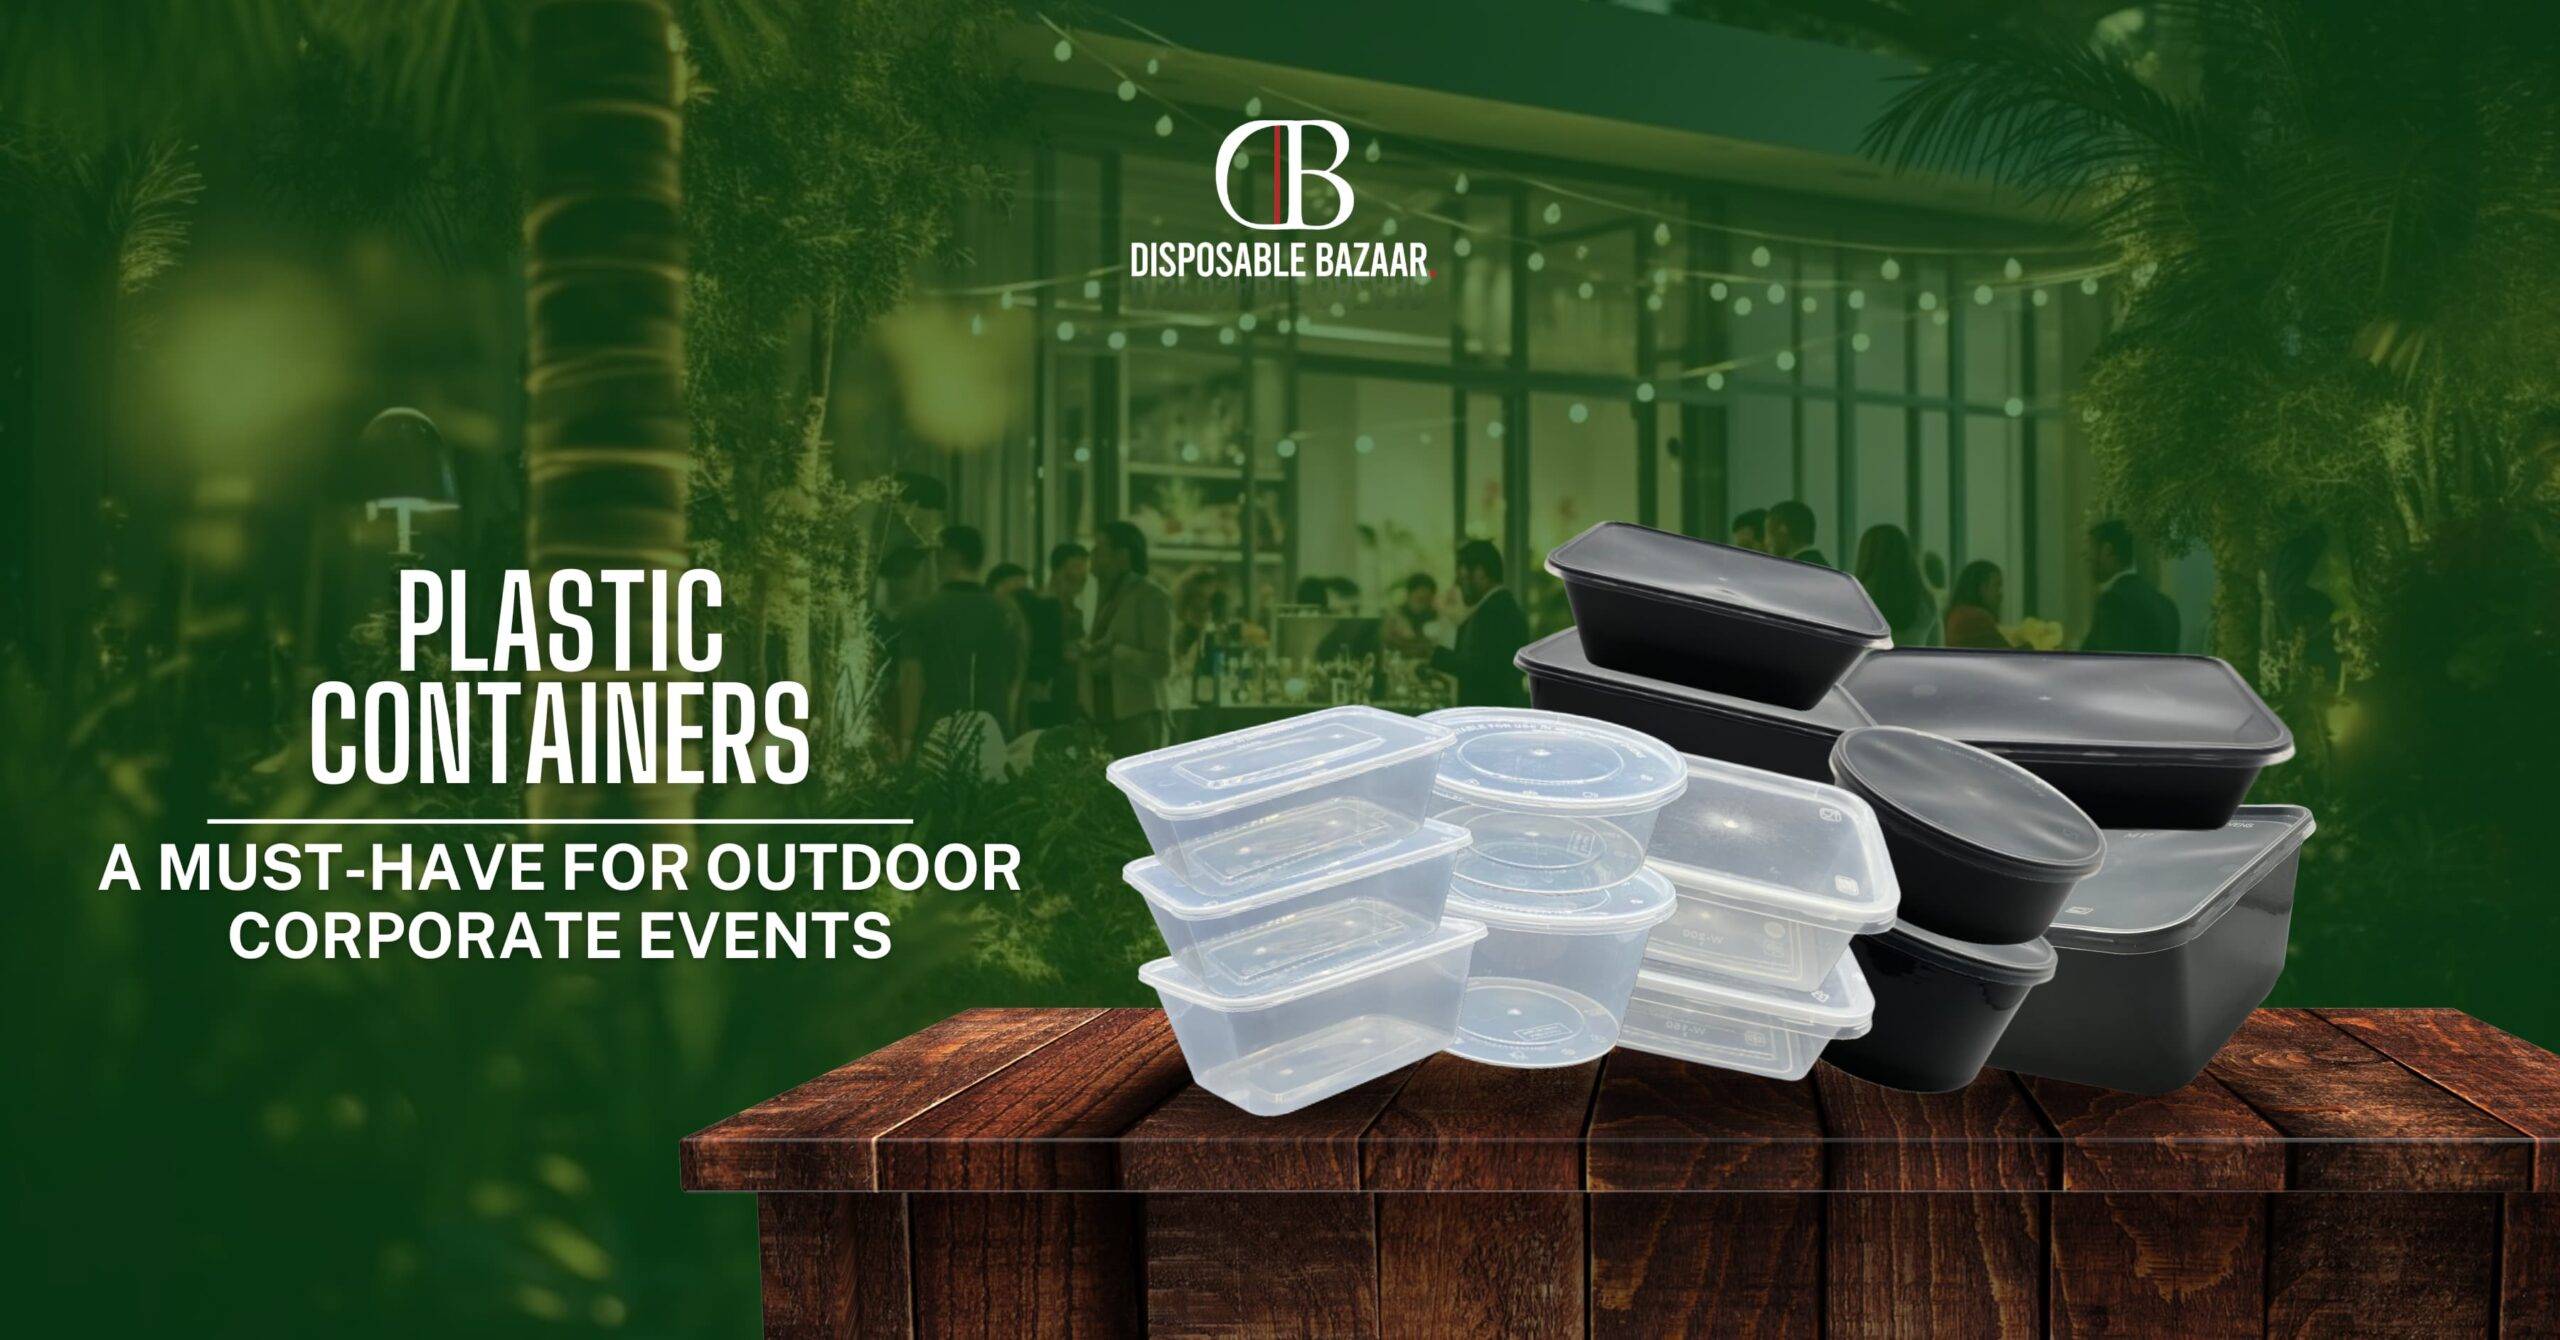 Plastic Containers: A Must-Have for Outdoor Corporate Events